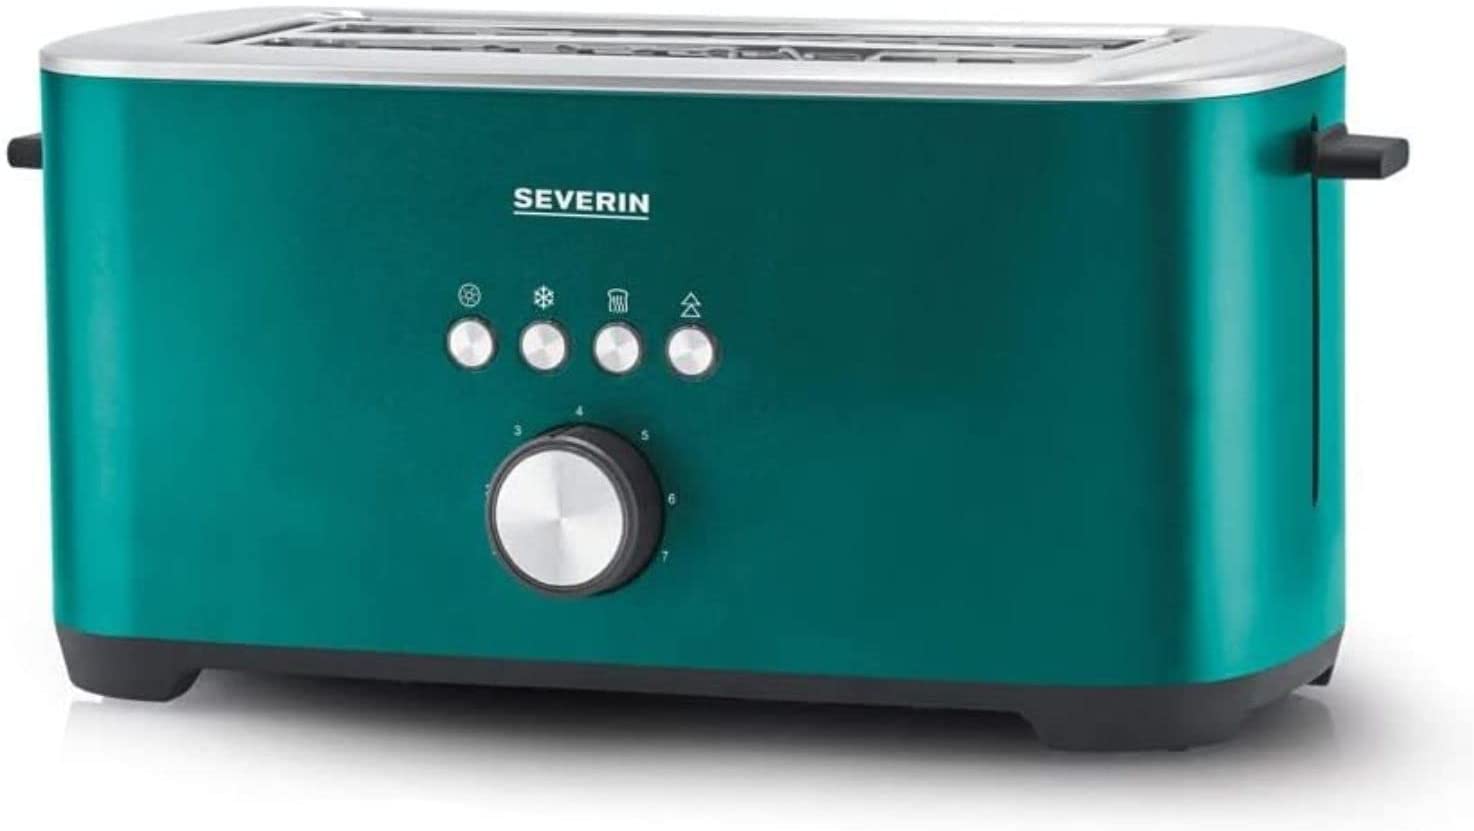 SEVERIN Long Slot Toaster, Toaster with Bread Attachment, High-Quality Stainless Steel Toaster with Large Roasting Chambers and Bagel Function, Matt Green, AT 9267